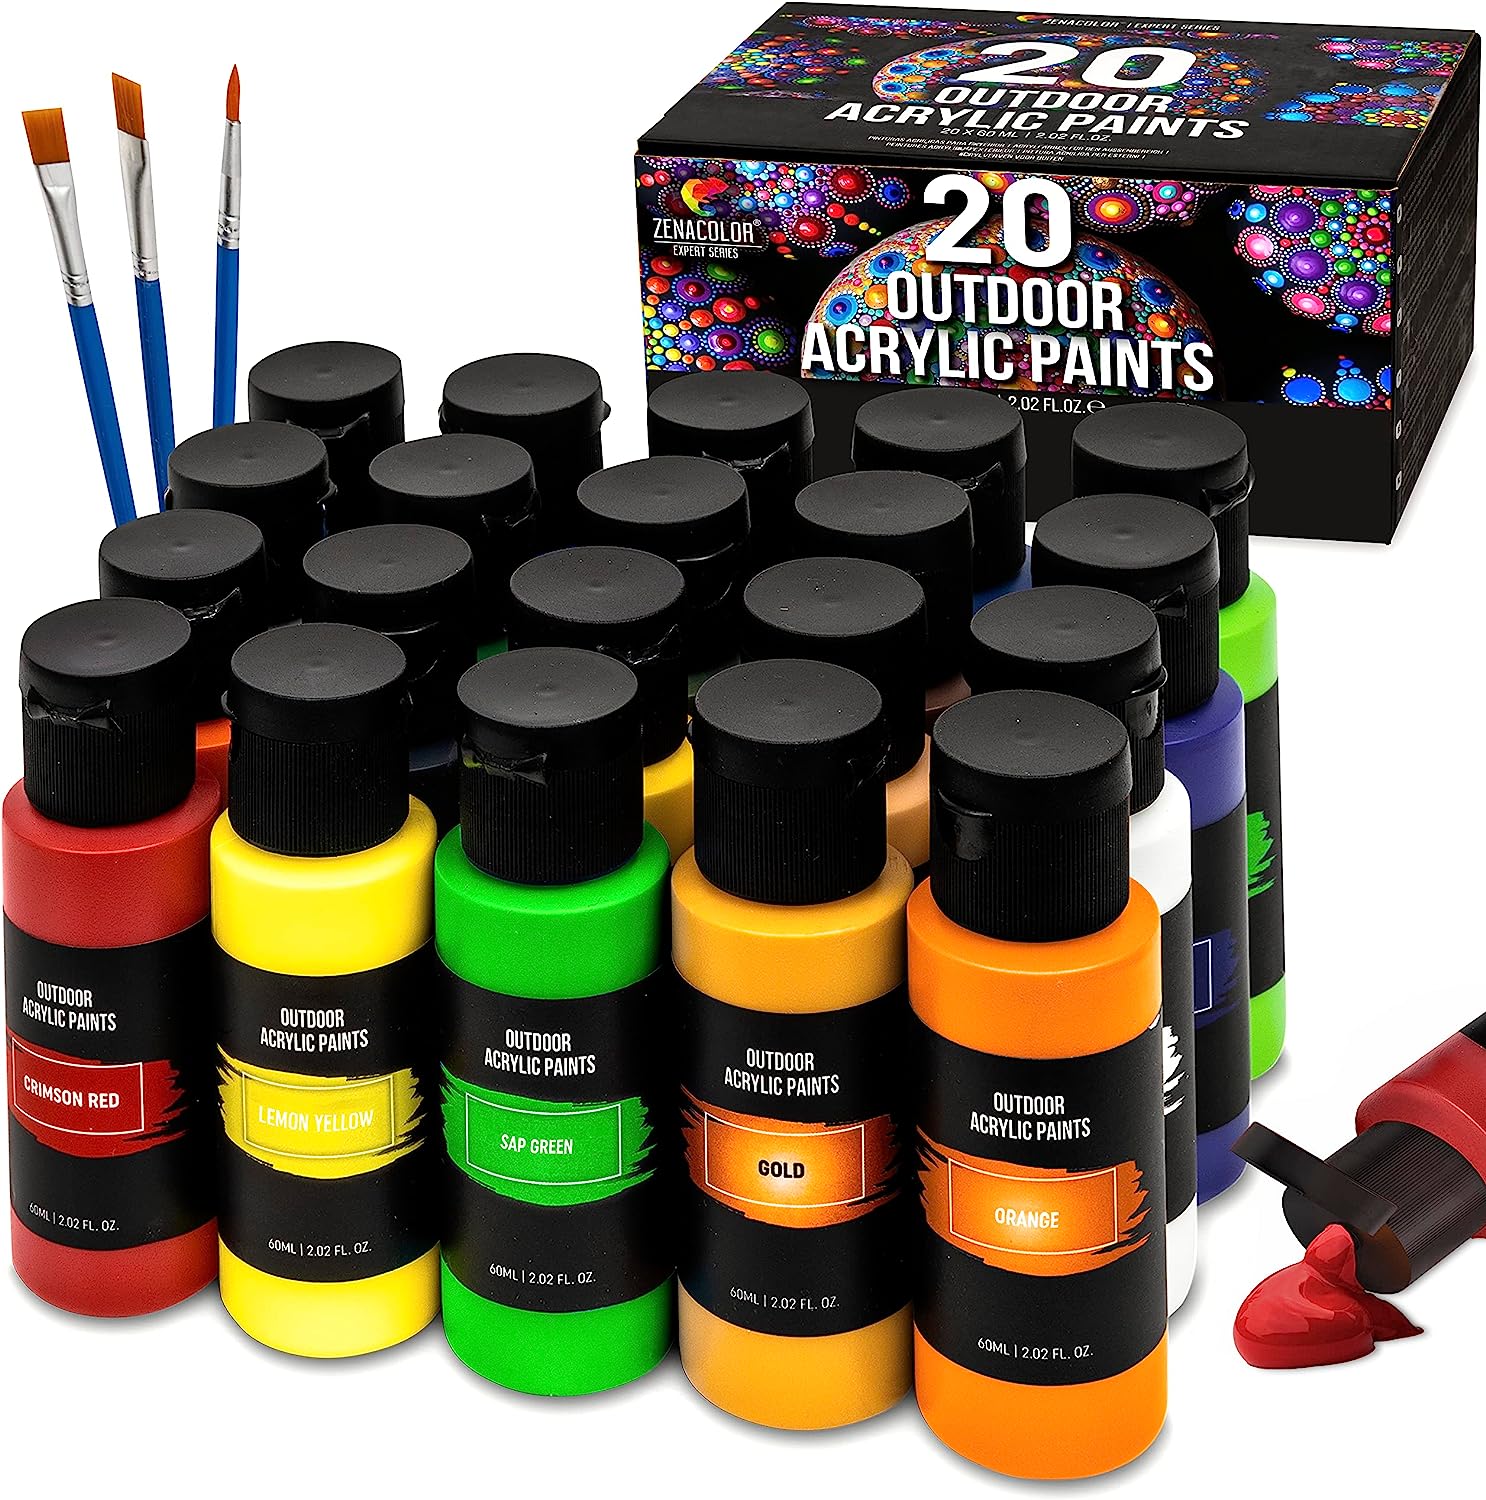 Outdoor acrylic paint set (2 fl oz)- 20 Tubes 2 with [...]